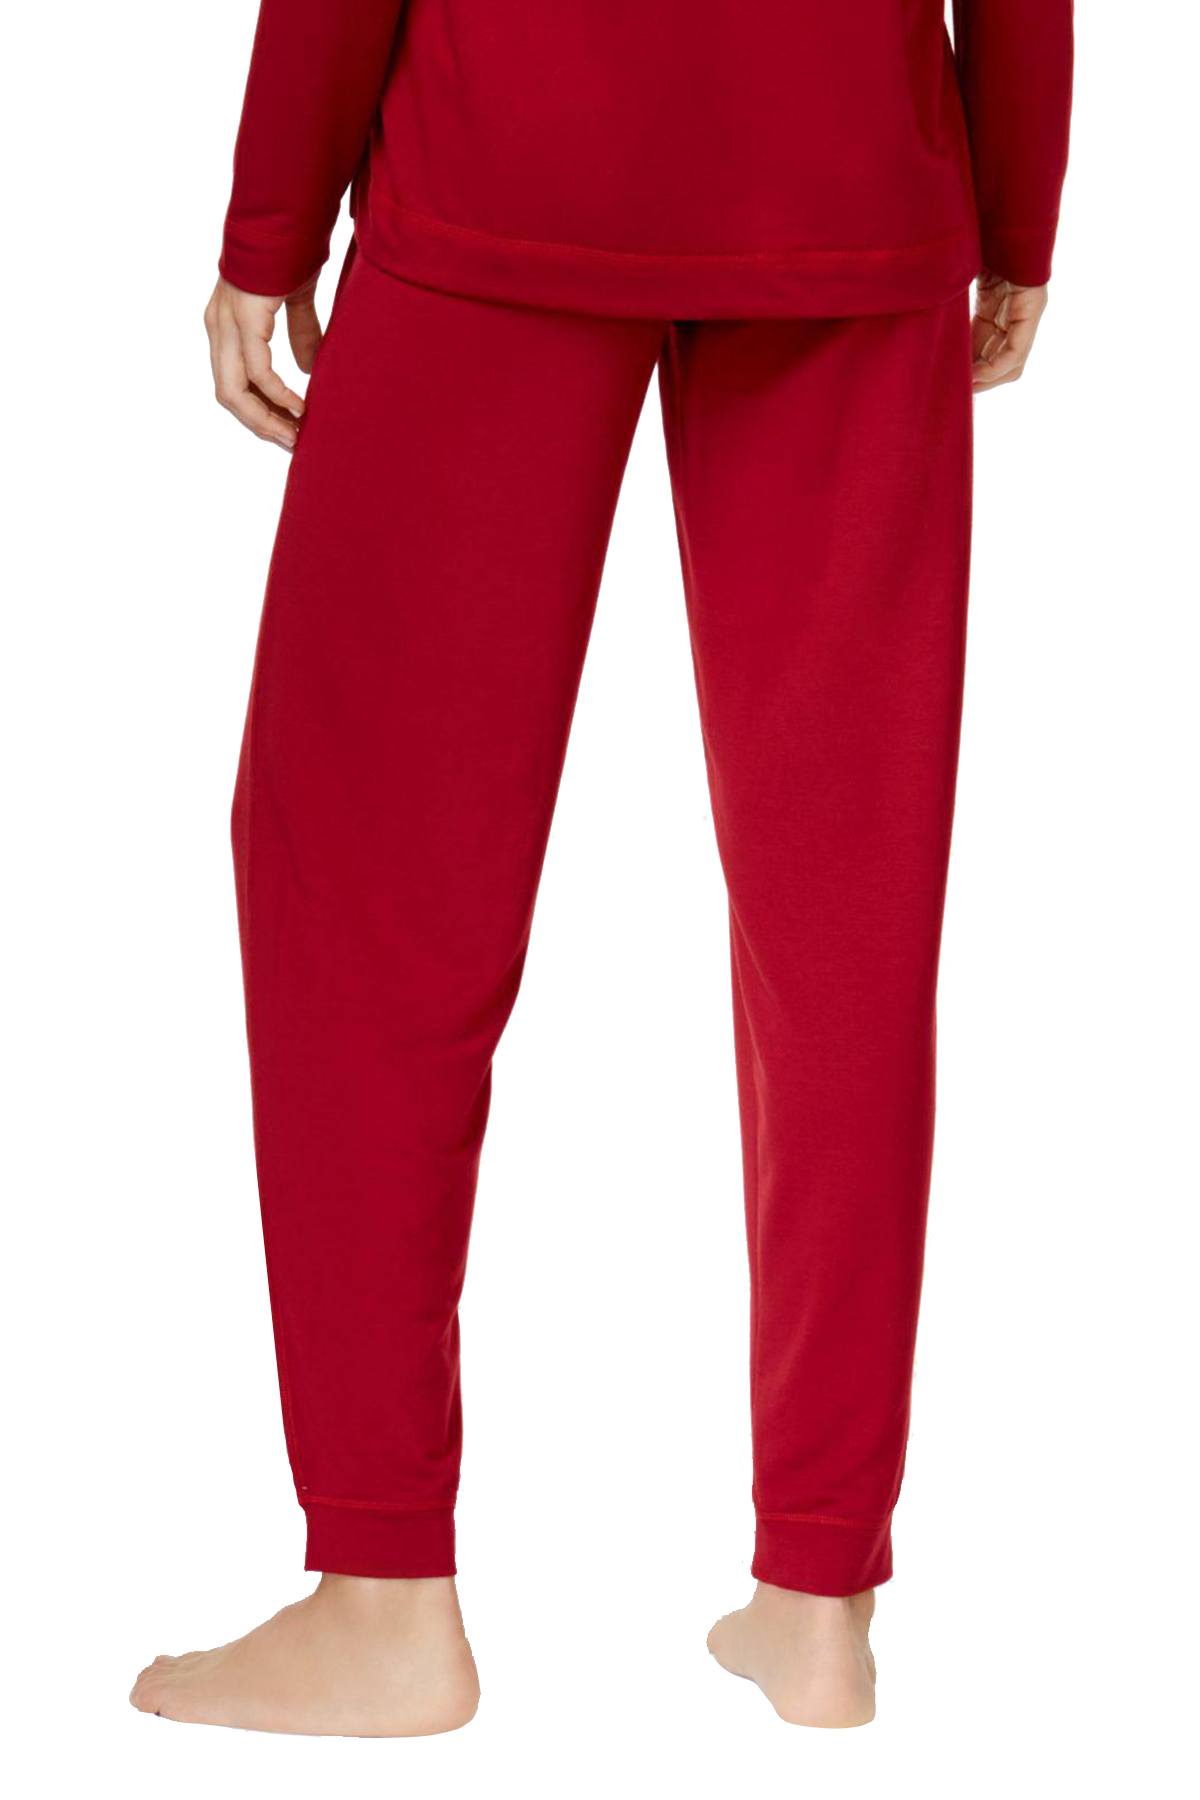 Hue Rhubarb-Red Super-Soft French-Terry Cuffed Lounge Jogger